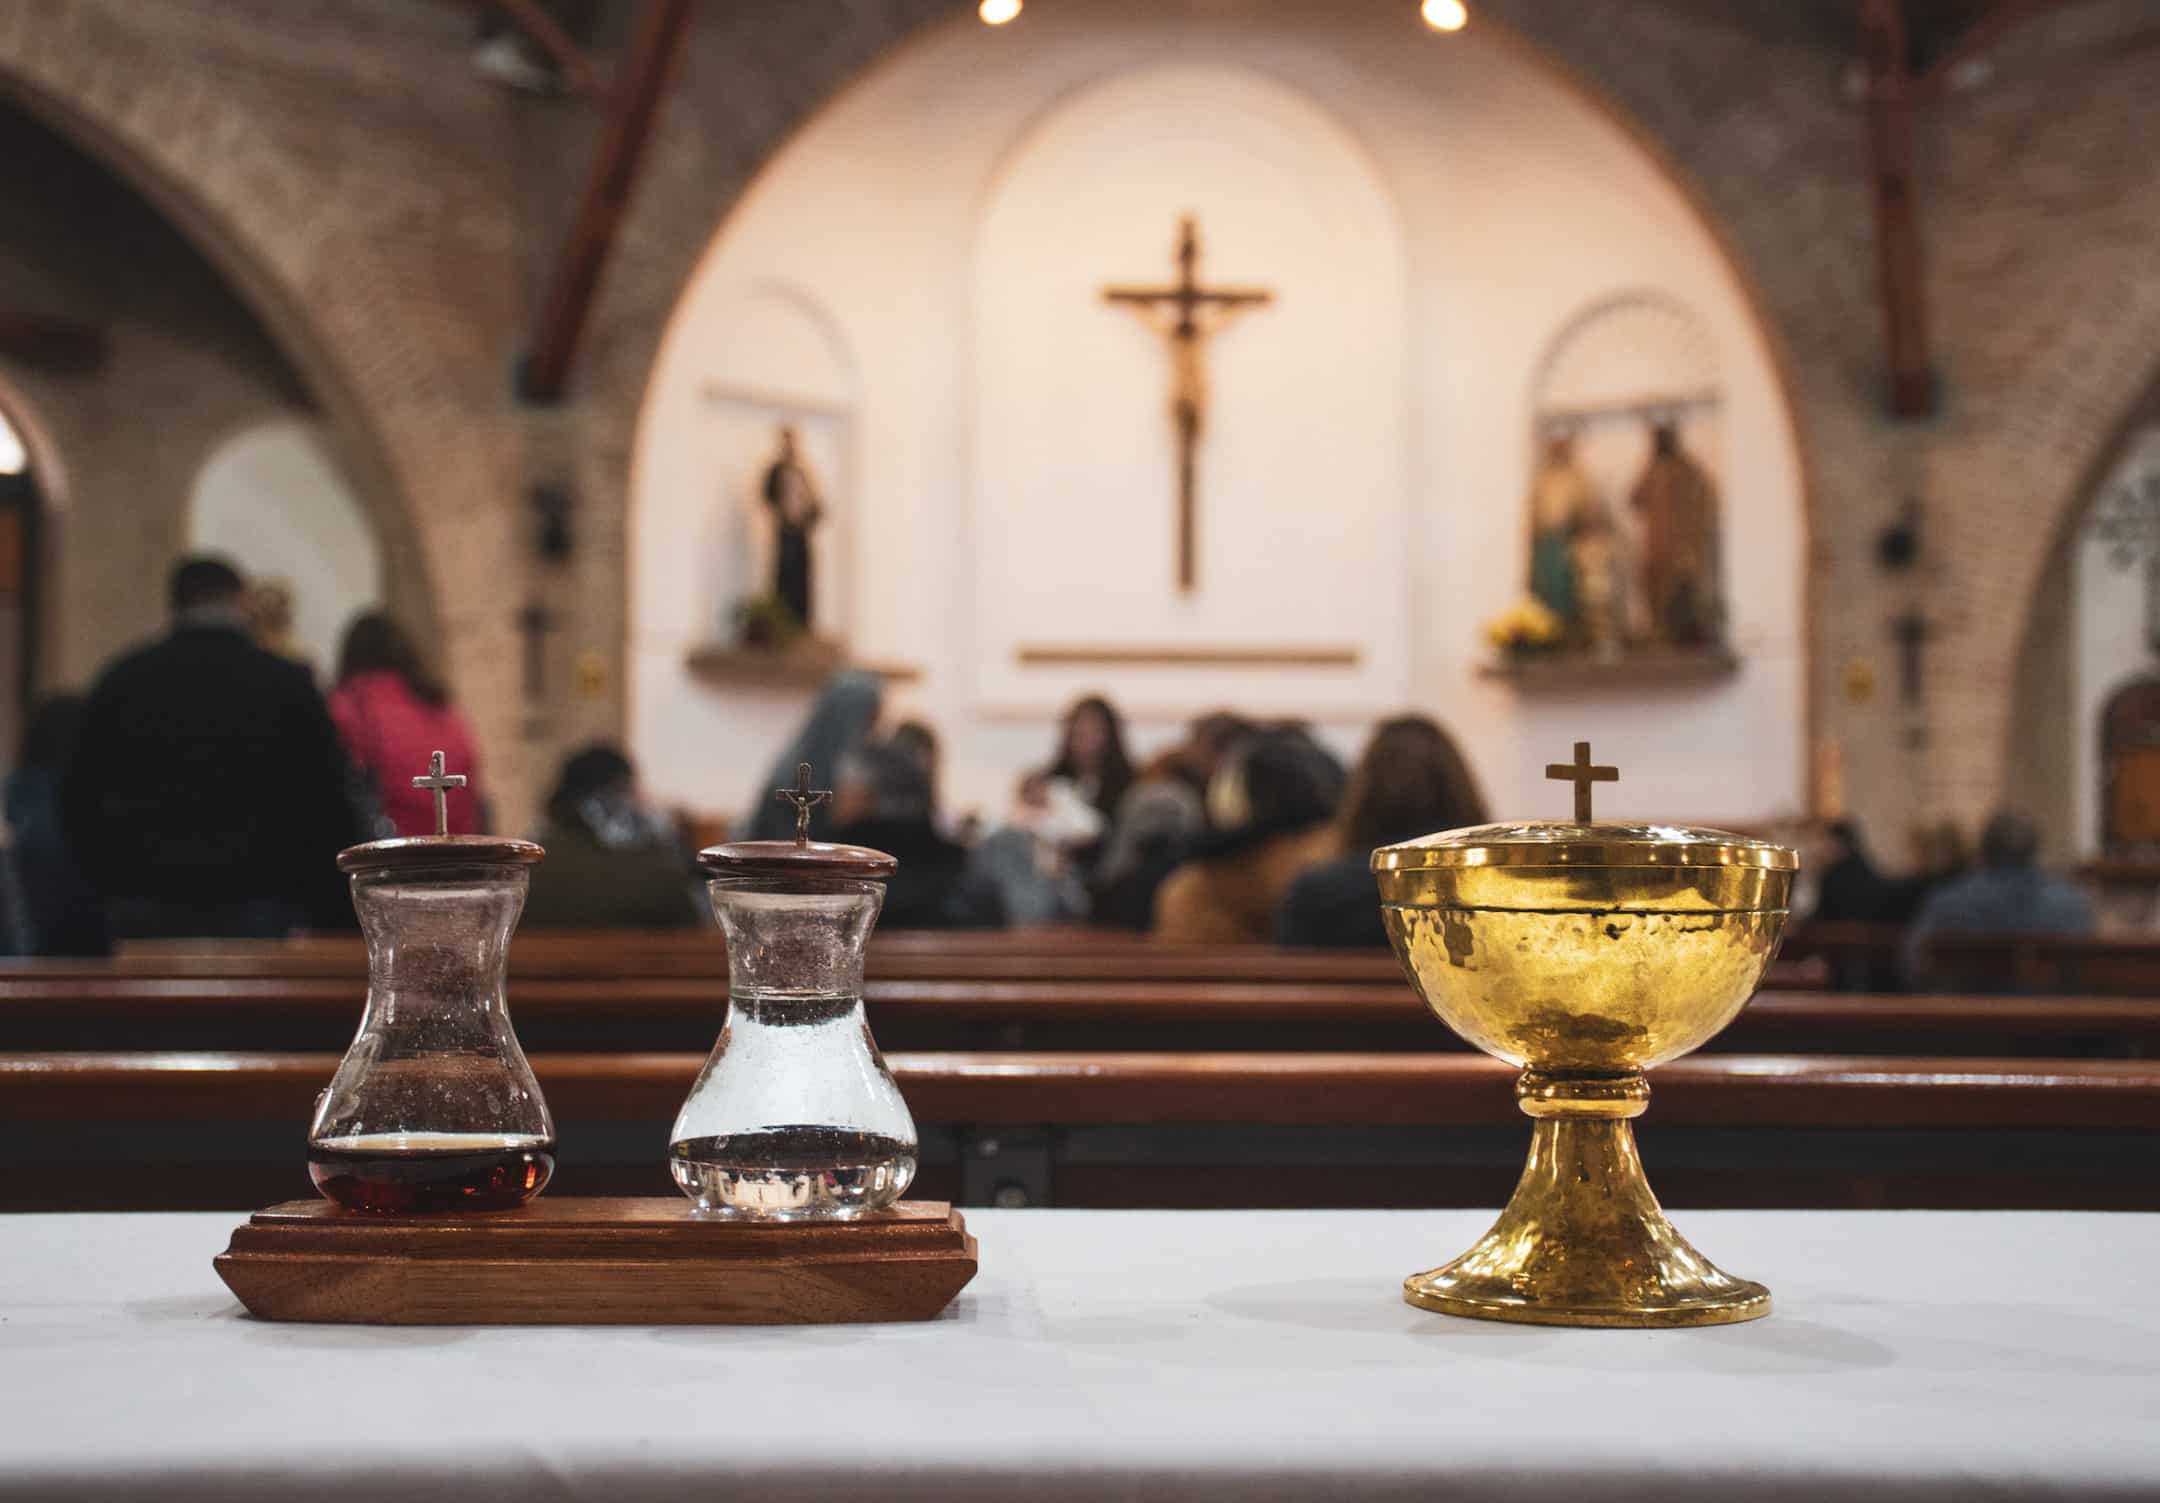 Holy Eucharist of wine and bread